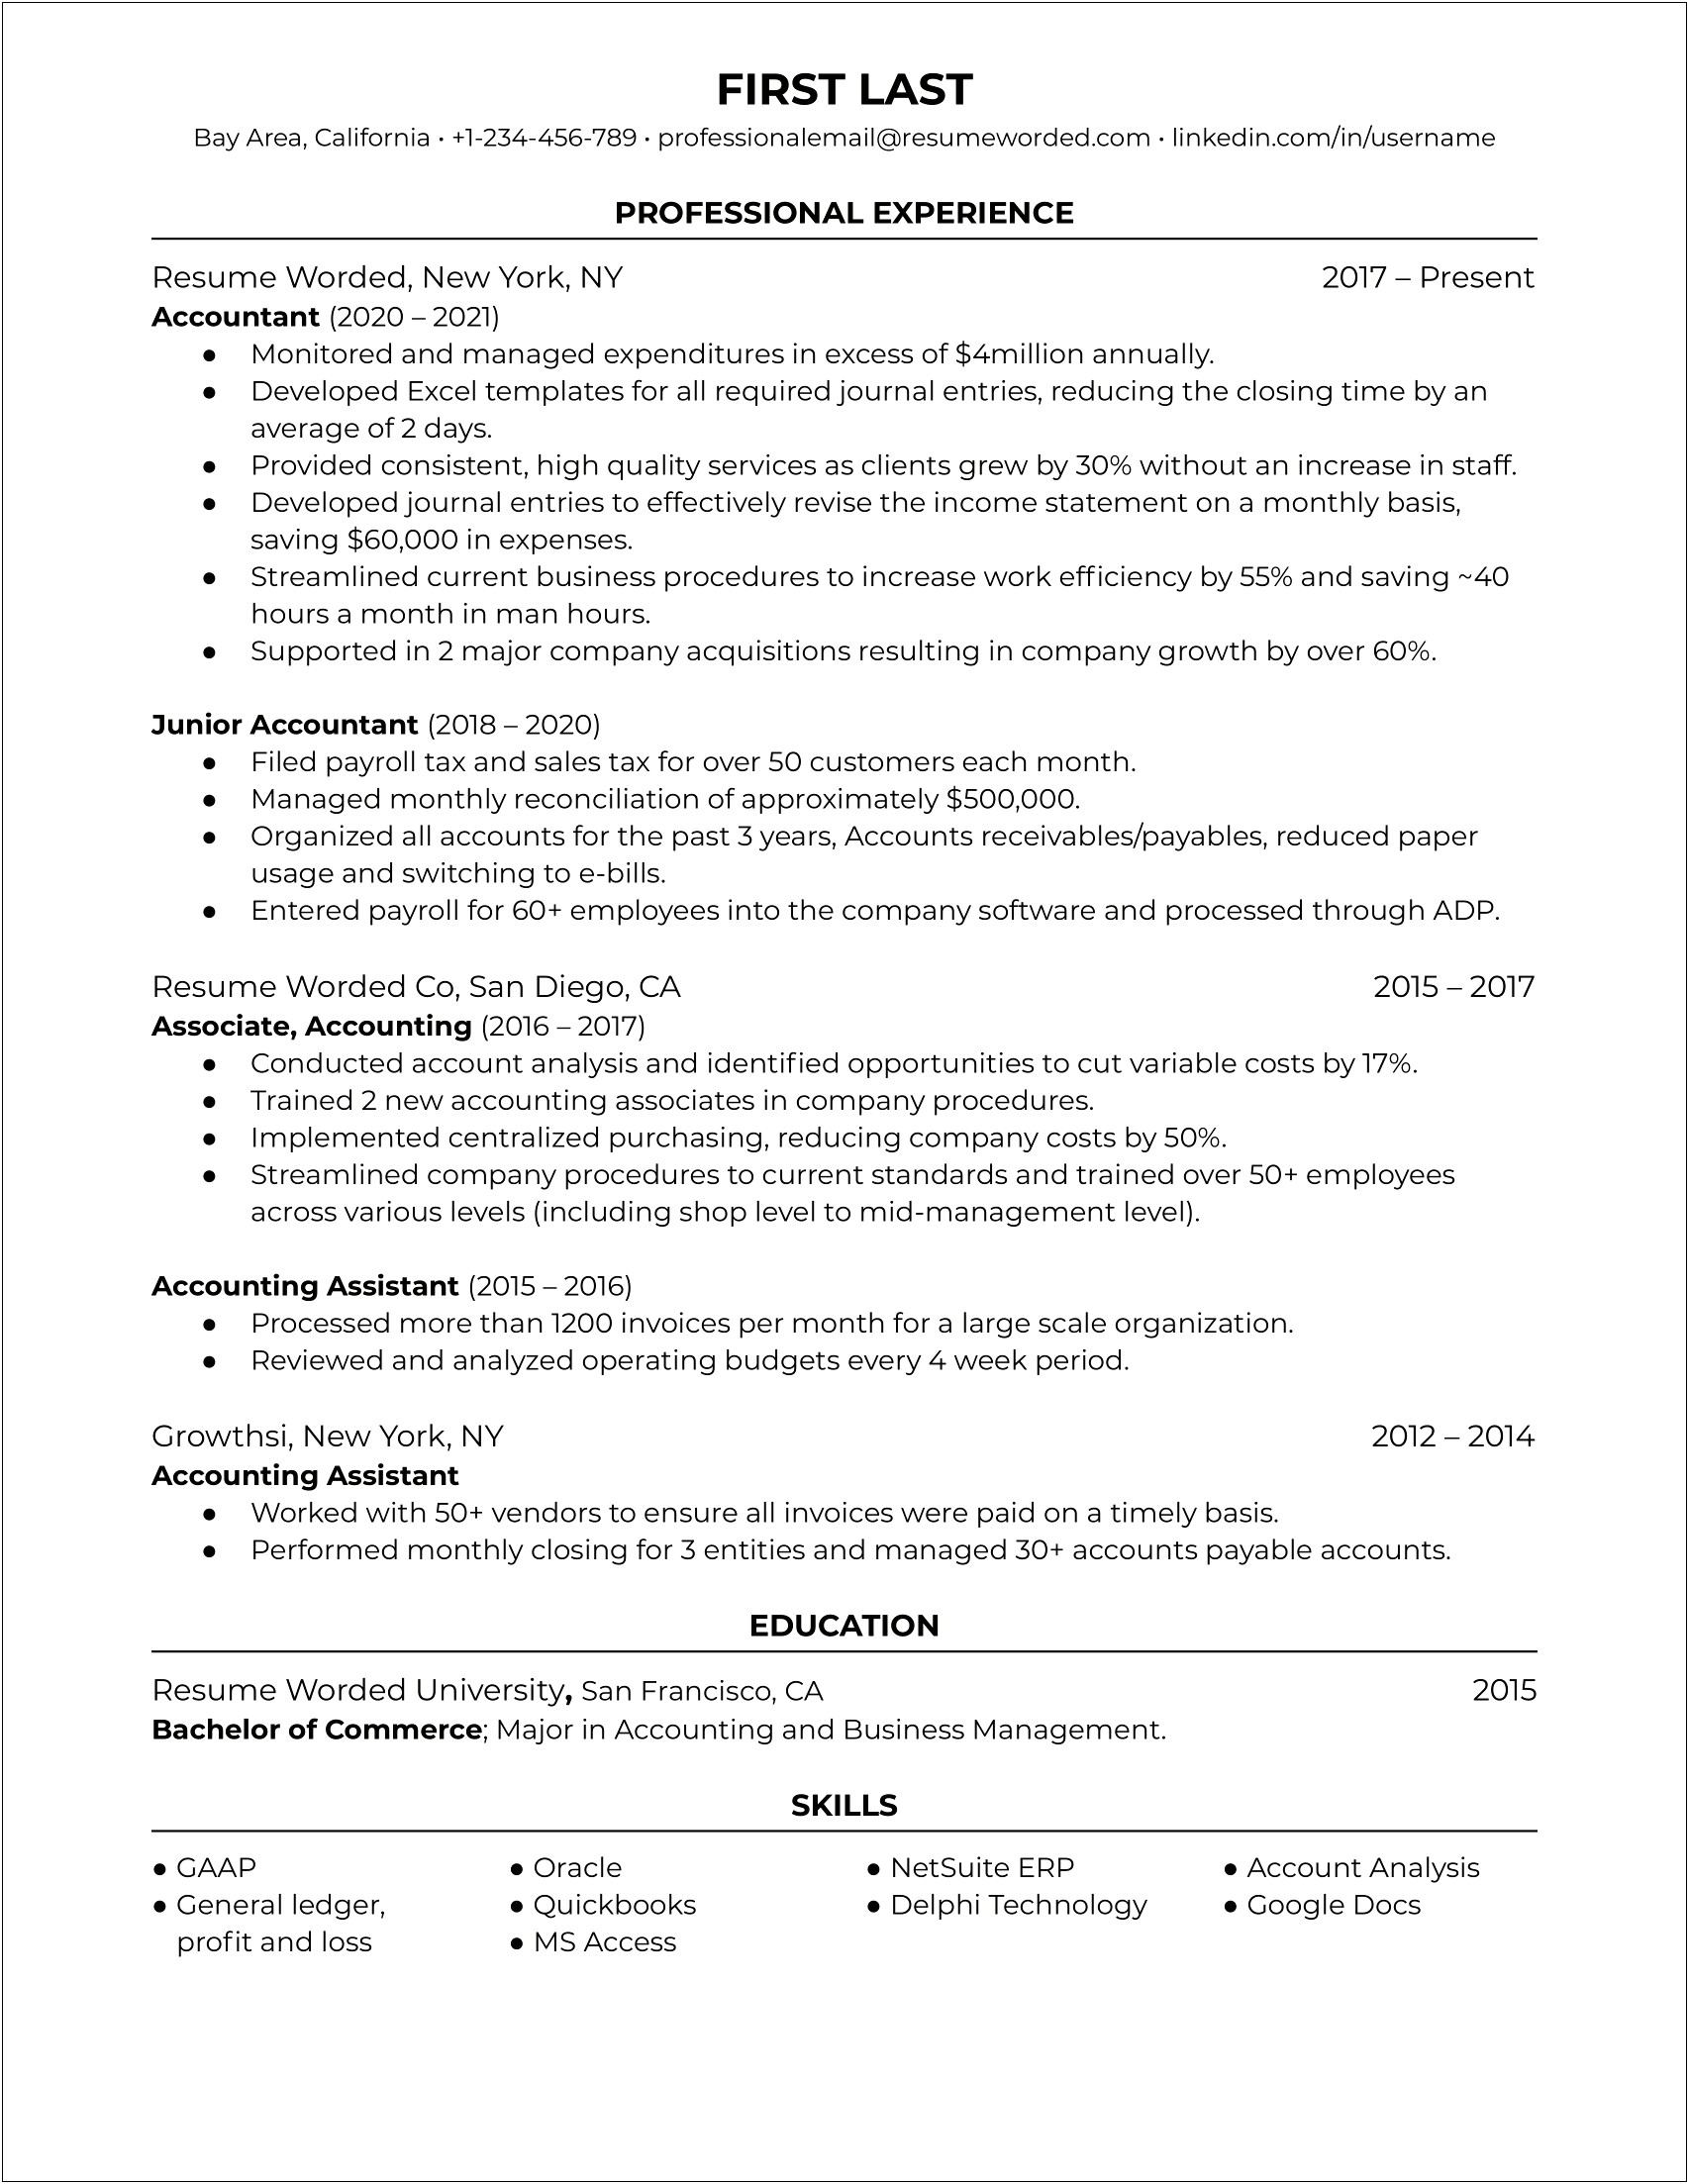 Accountant Resume With 2 Years Experience